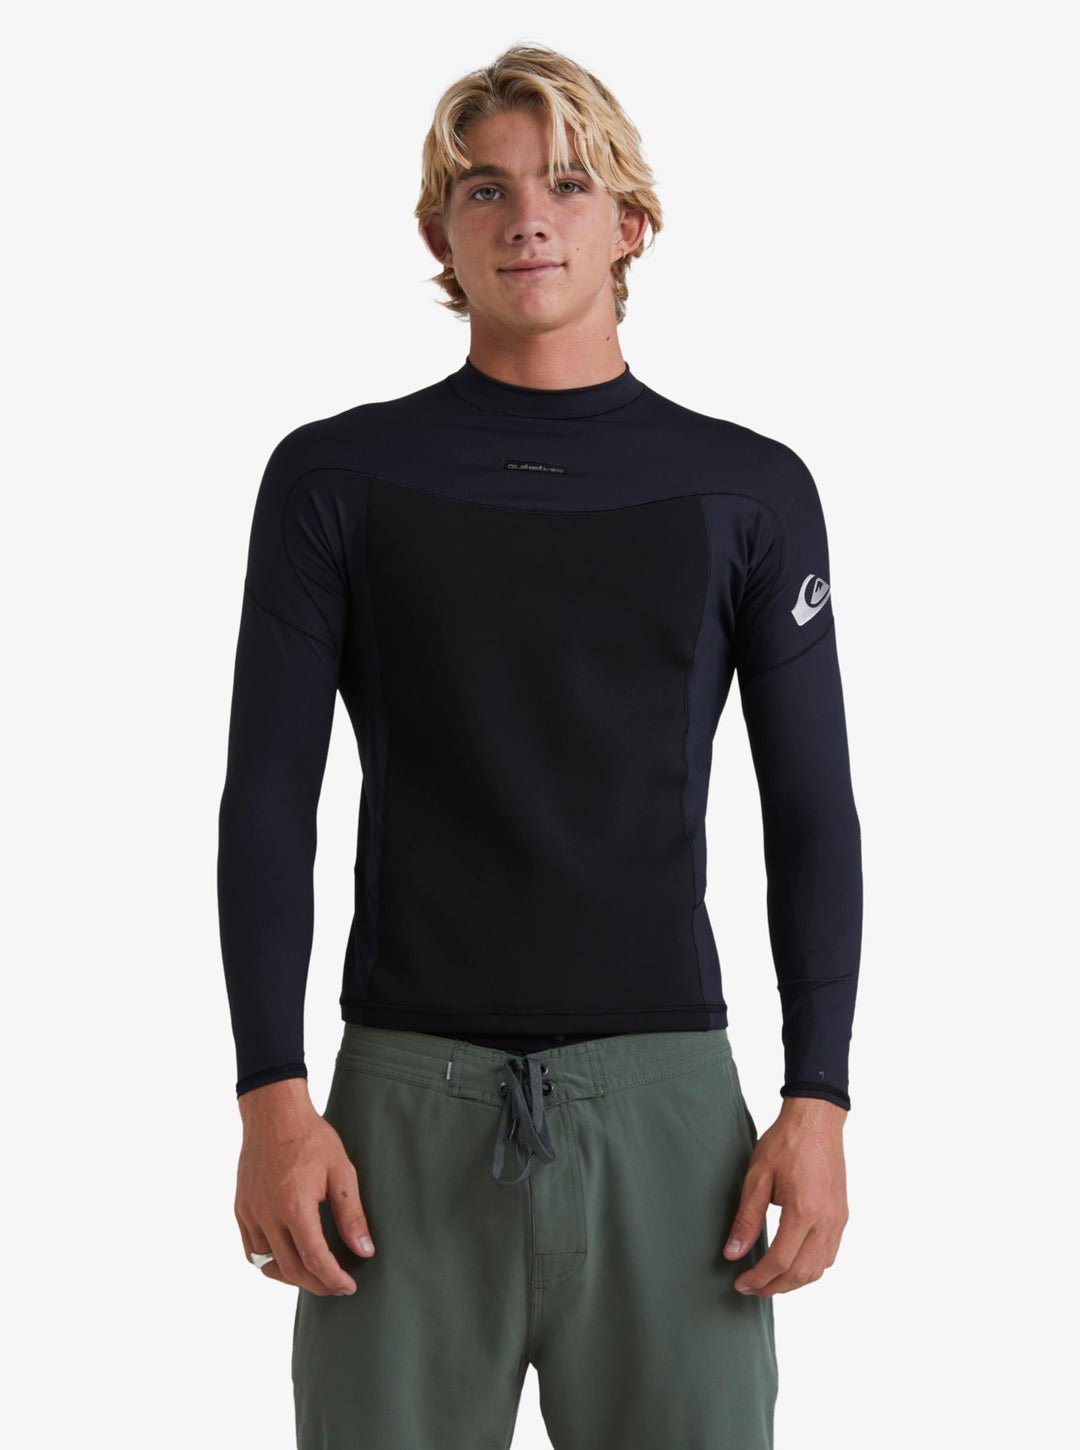 Everyday Sessions 1mm Neoshirt Mens Wetsuit Top - Black